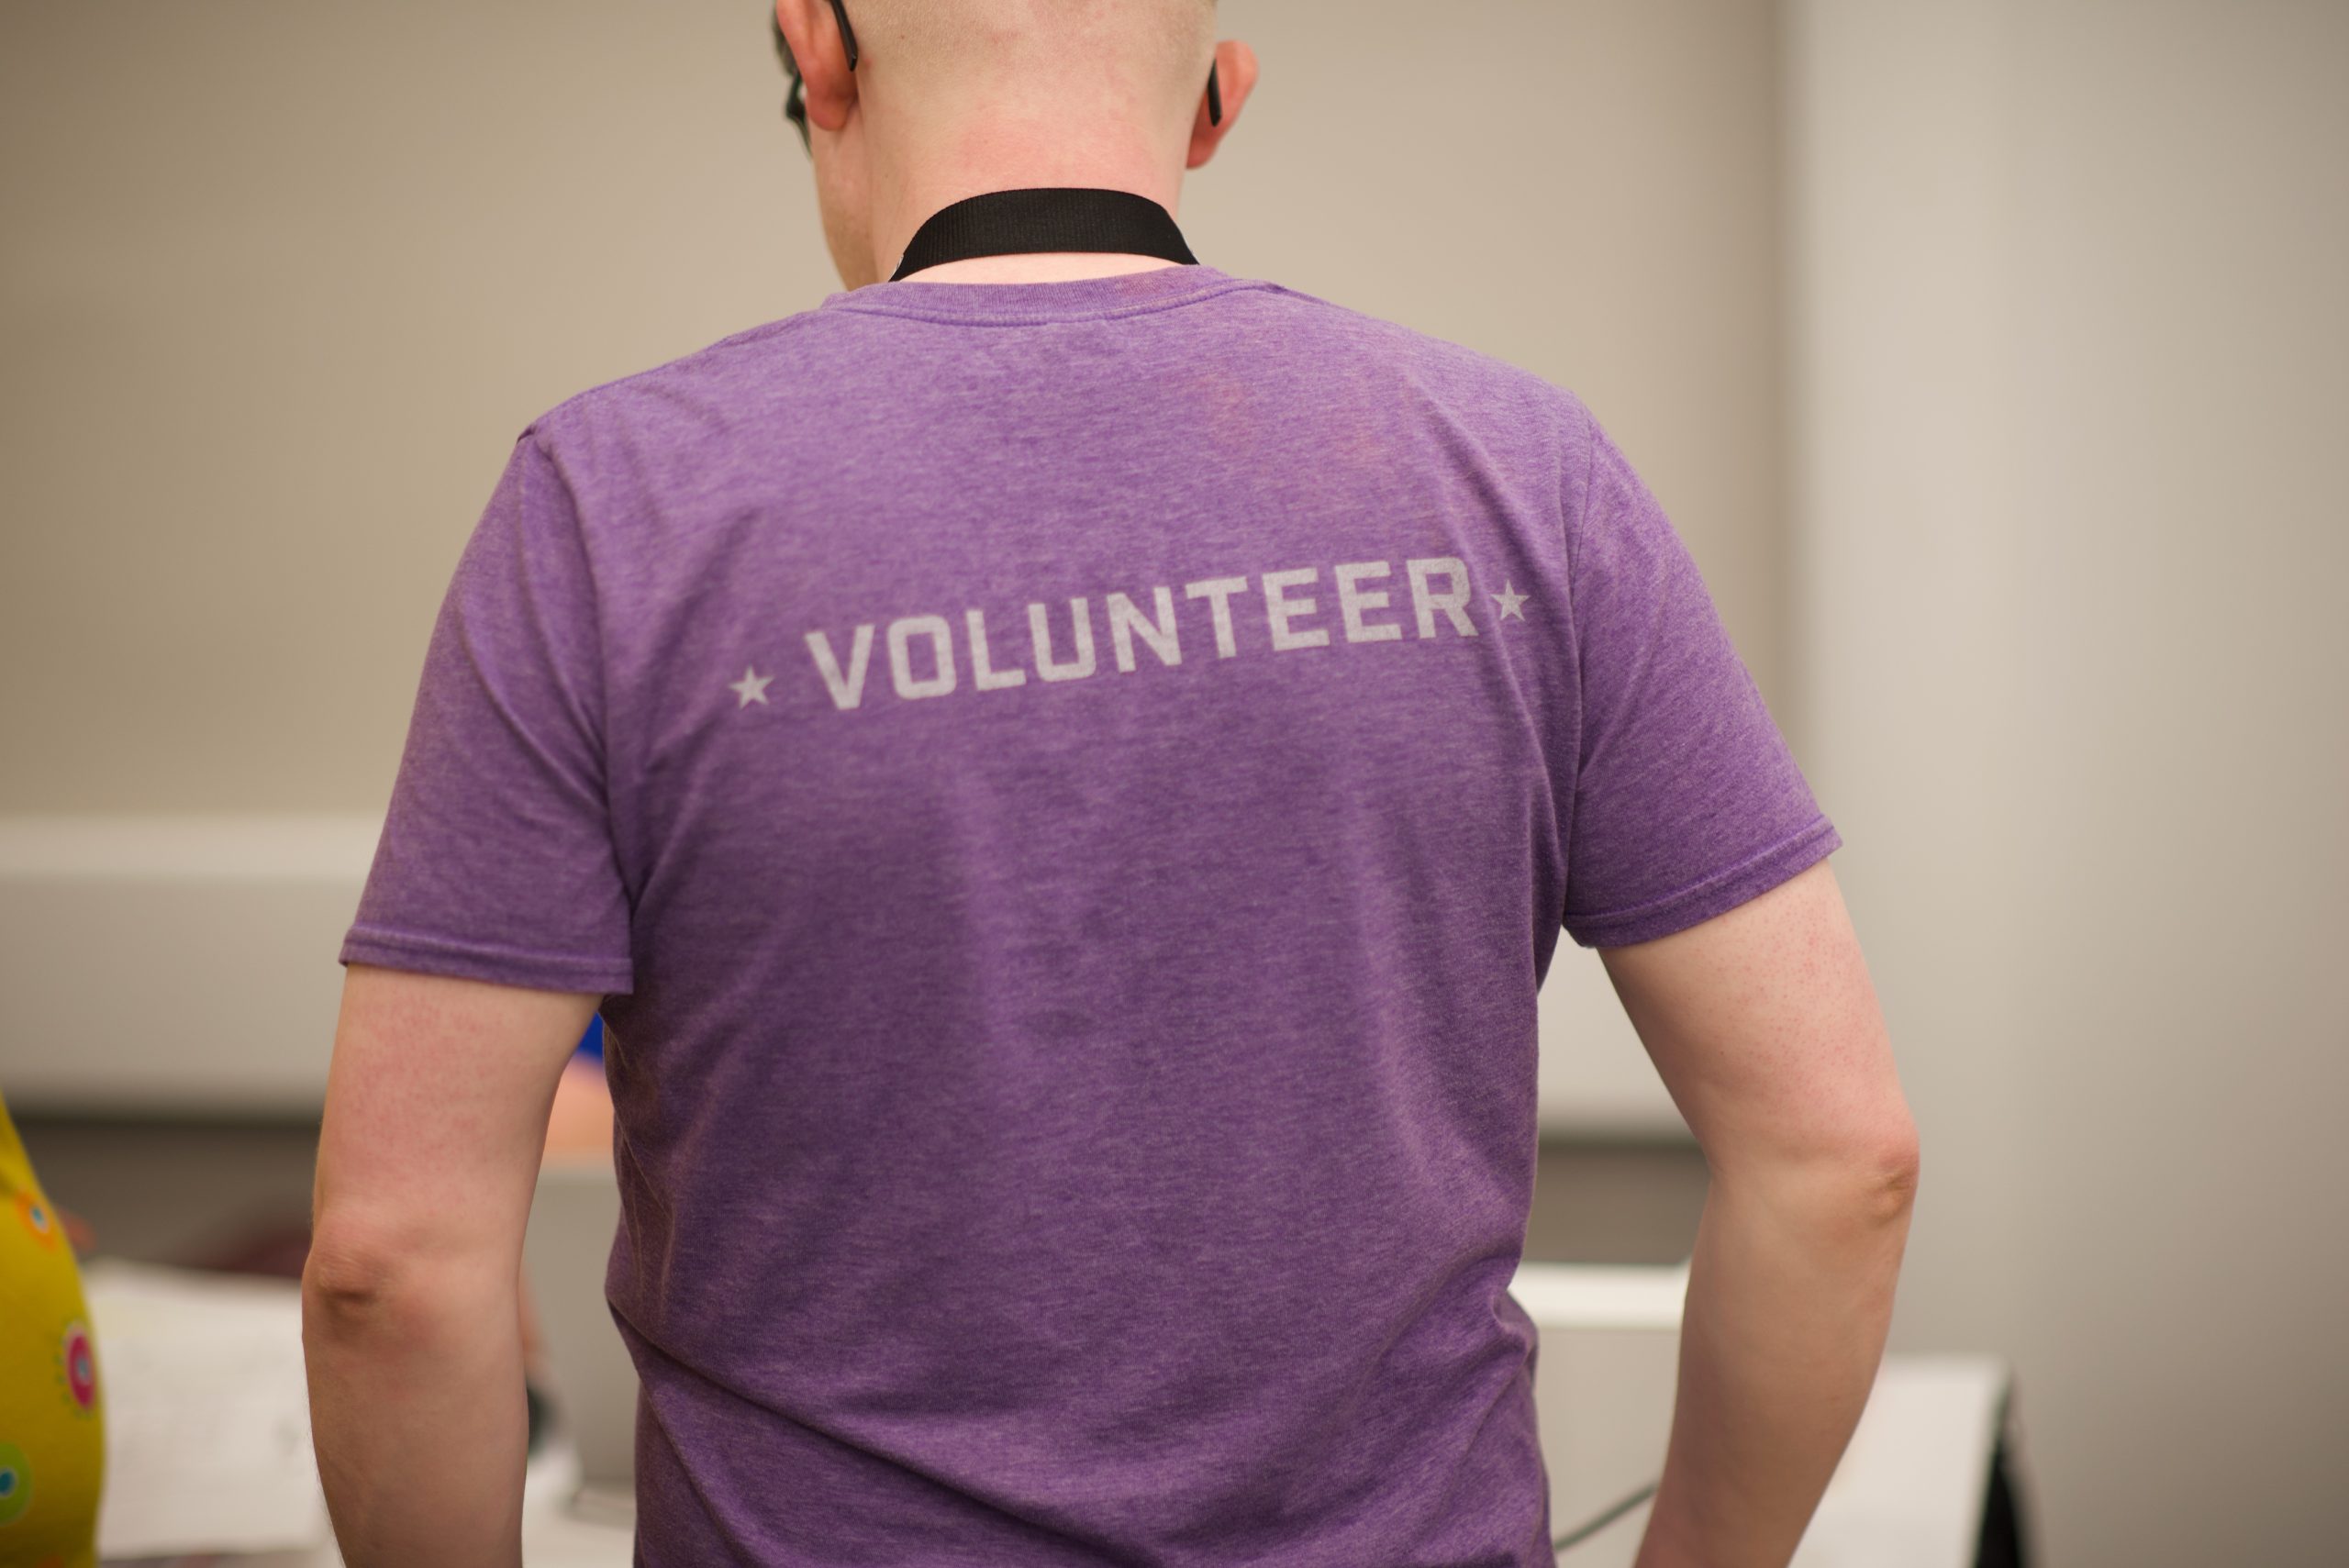 A person facing away from the camera wears a purple t-shirt with the word "Volunteer" printed between their shoulders.